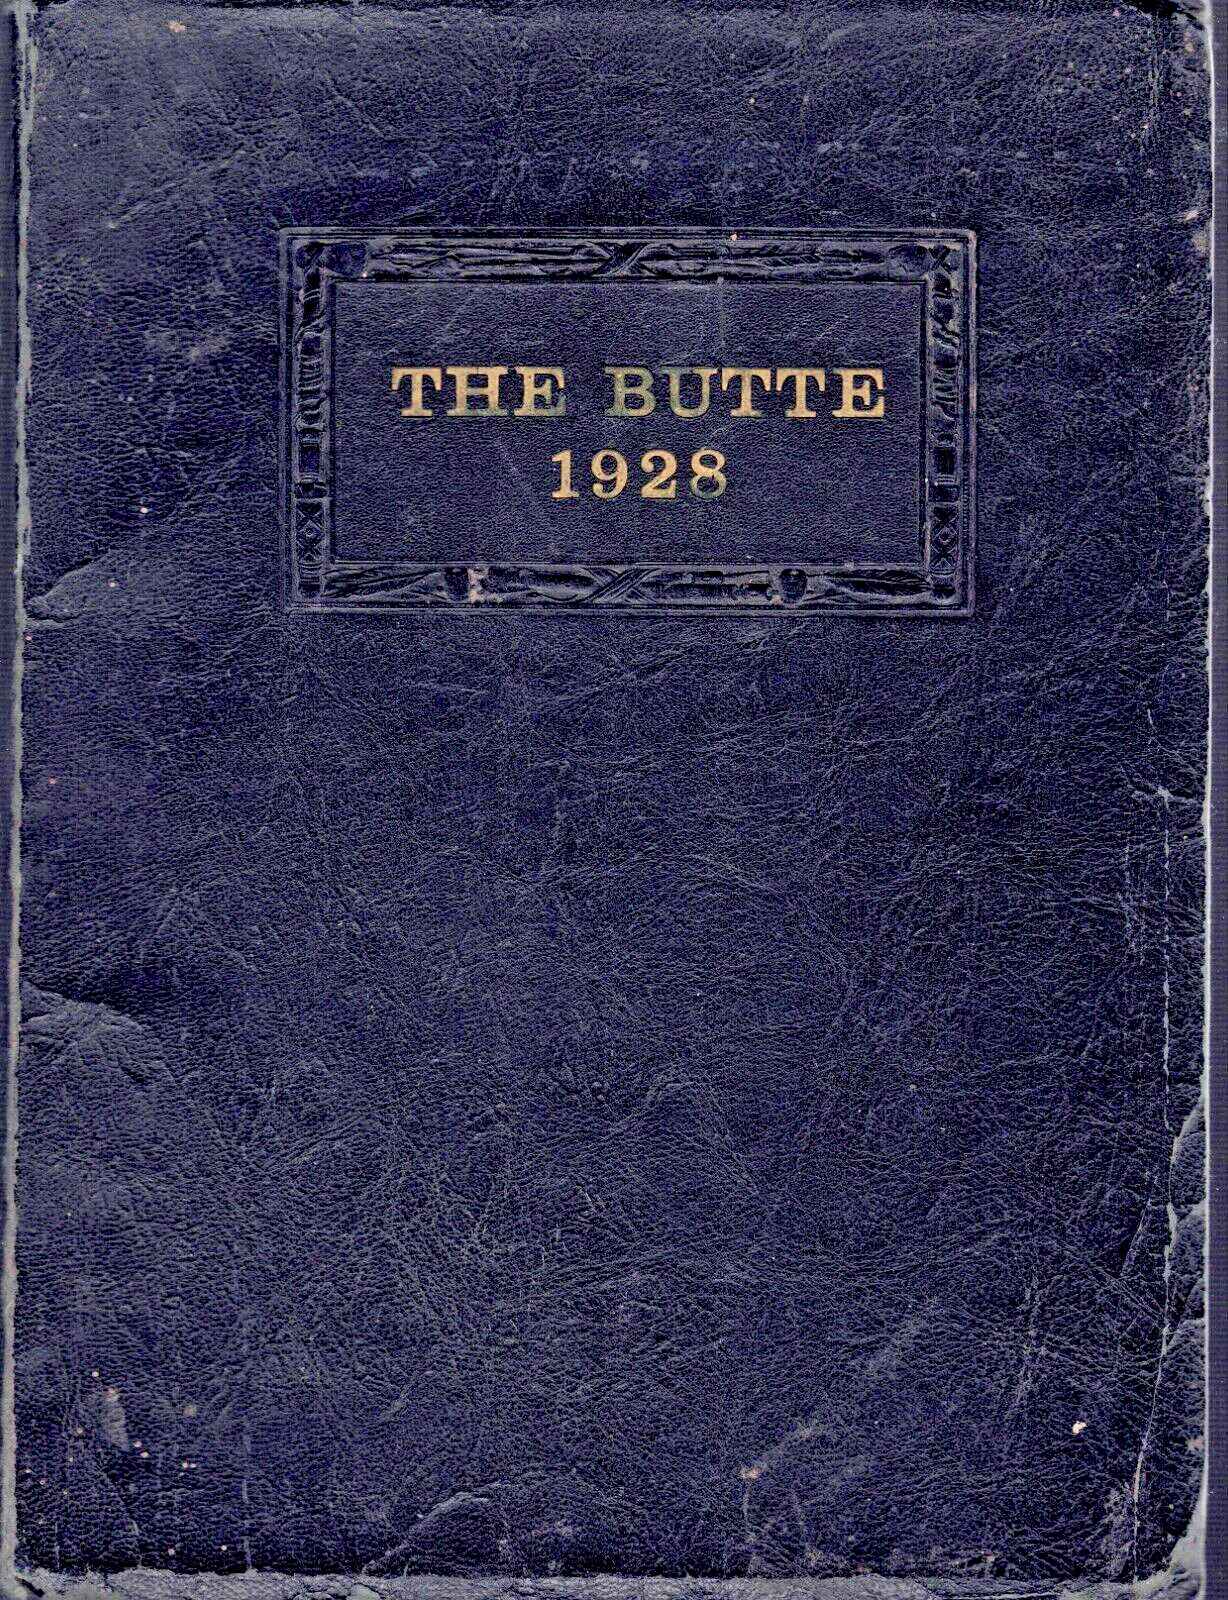 1928 Melba High School Yearbook, Butte, Melba, Idaho, located in Canyon County